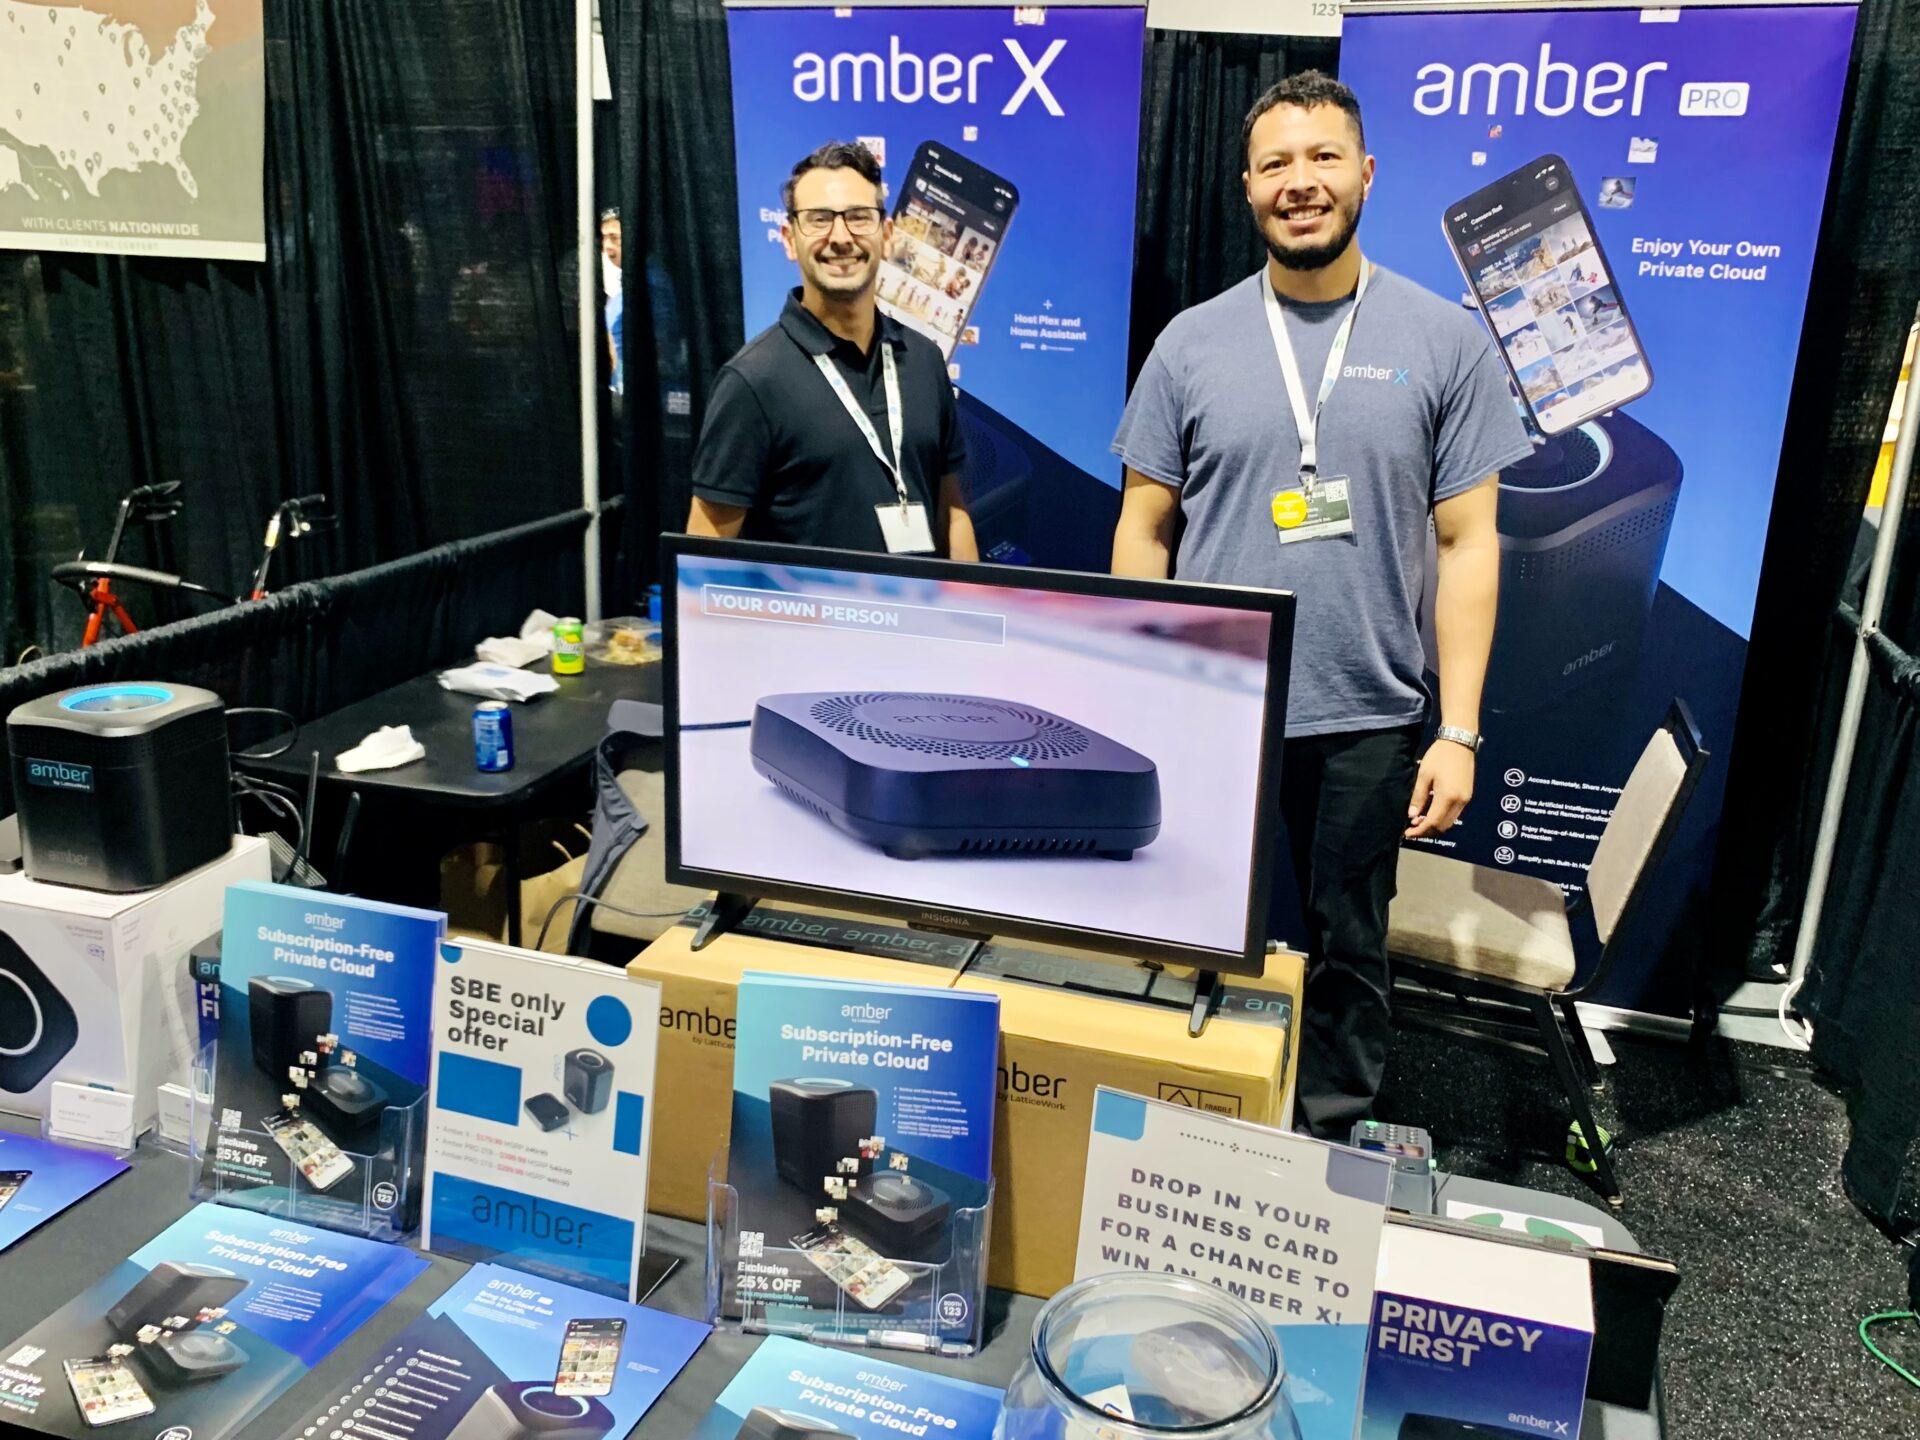 Peter and Chris, two of our tech support salesmen, answer questions about Amber at the SBE show.